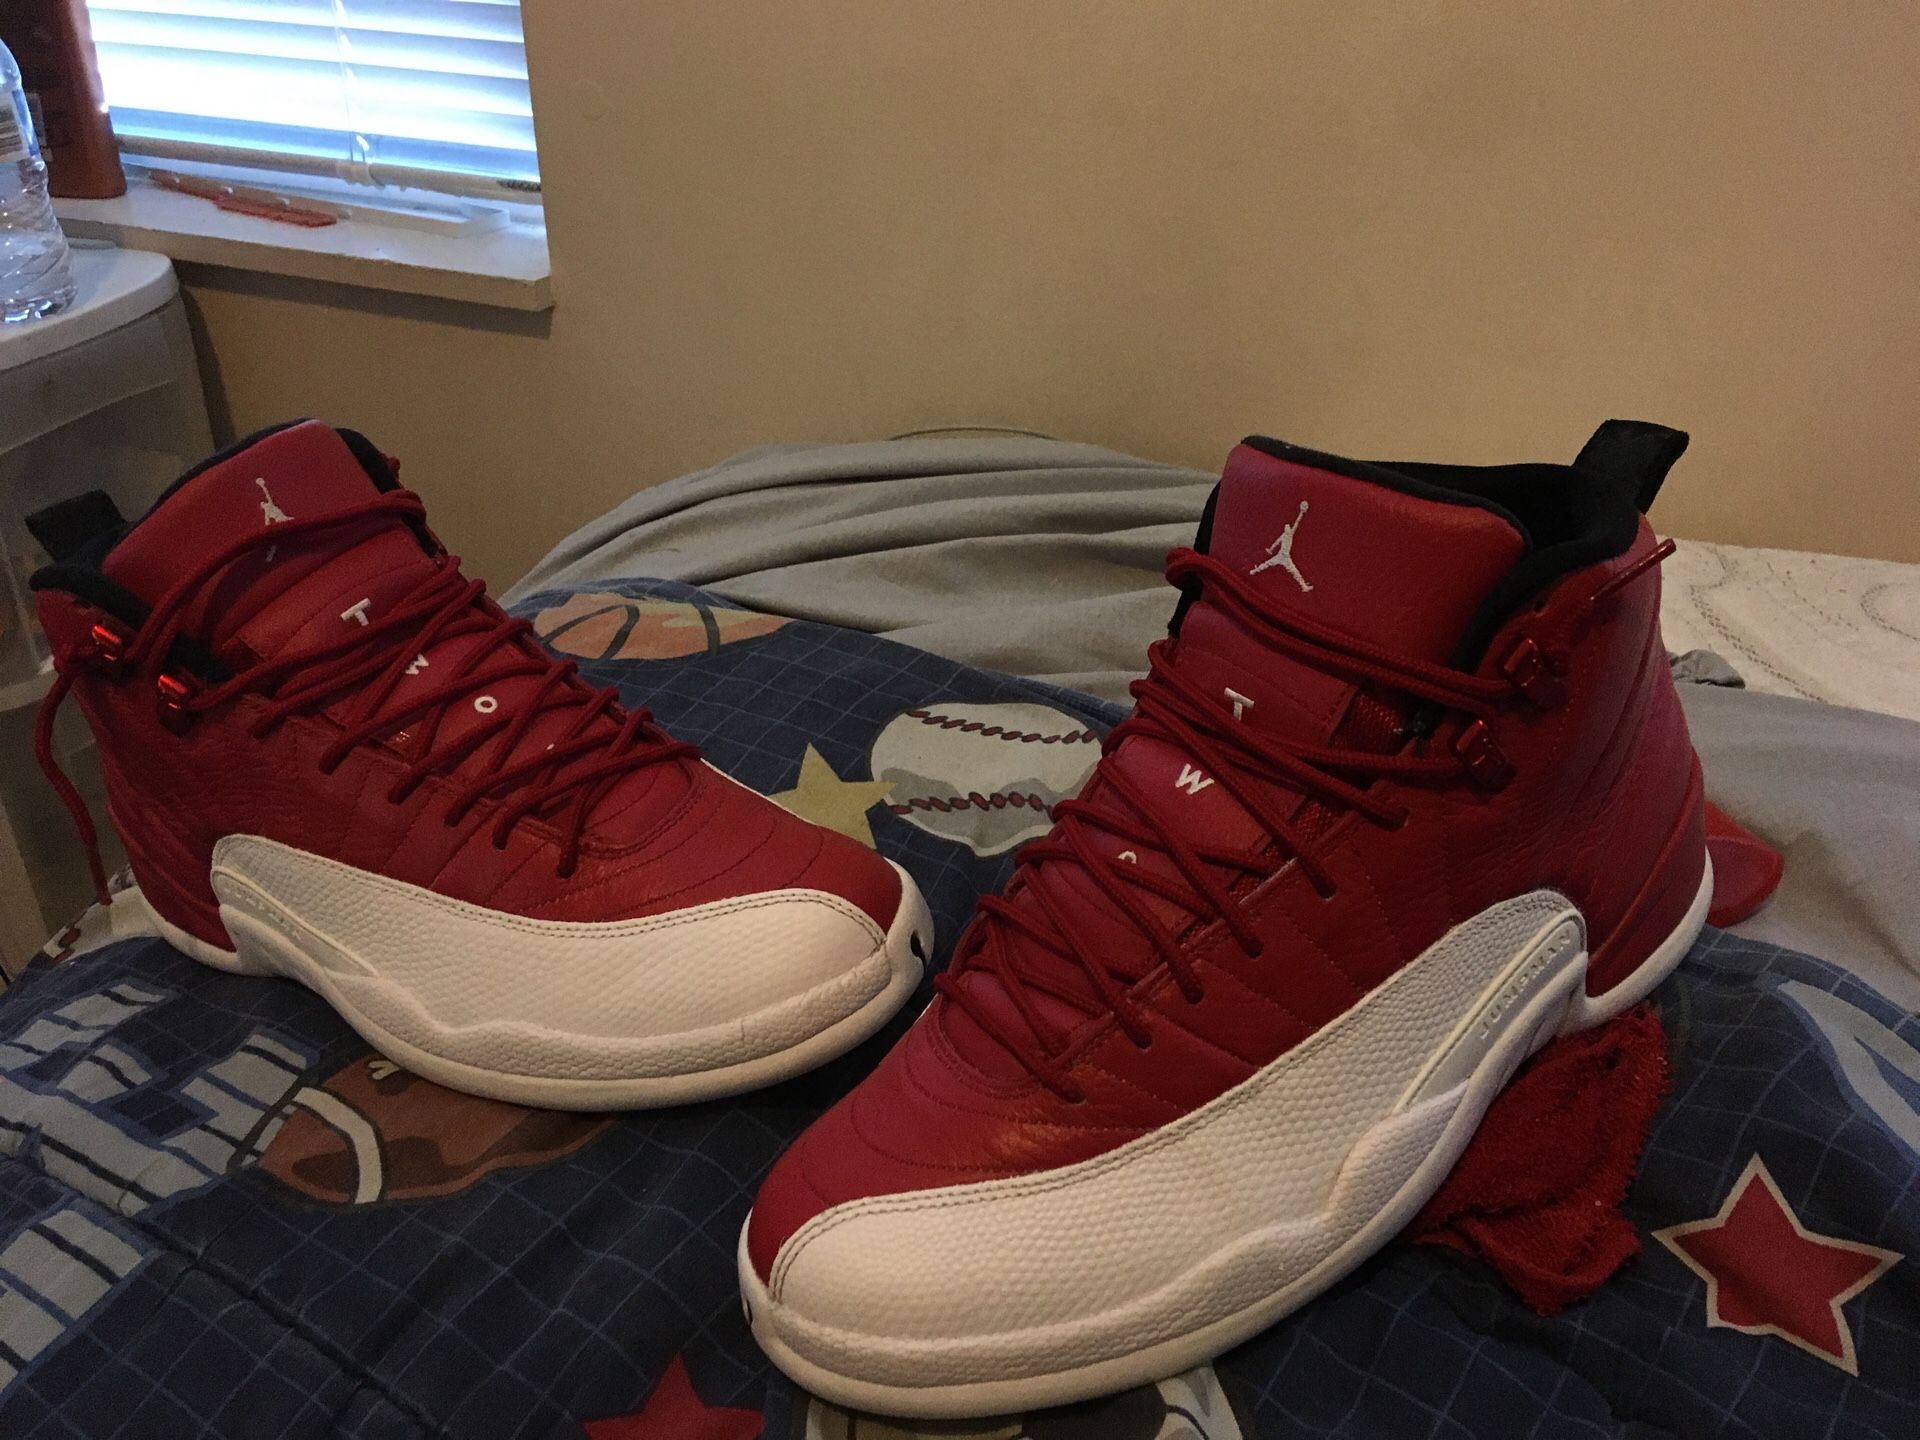 Jordan 12s white and red Christmas😍